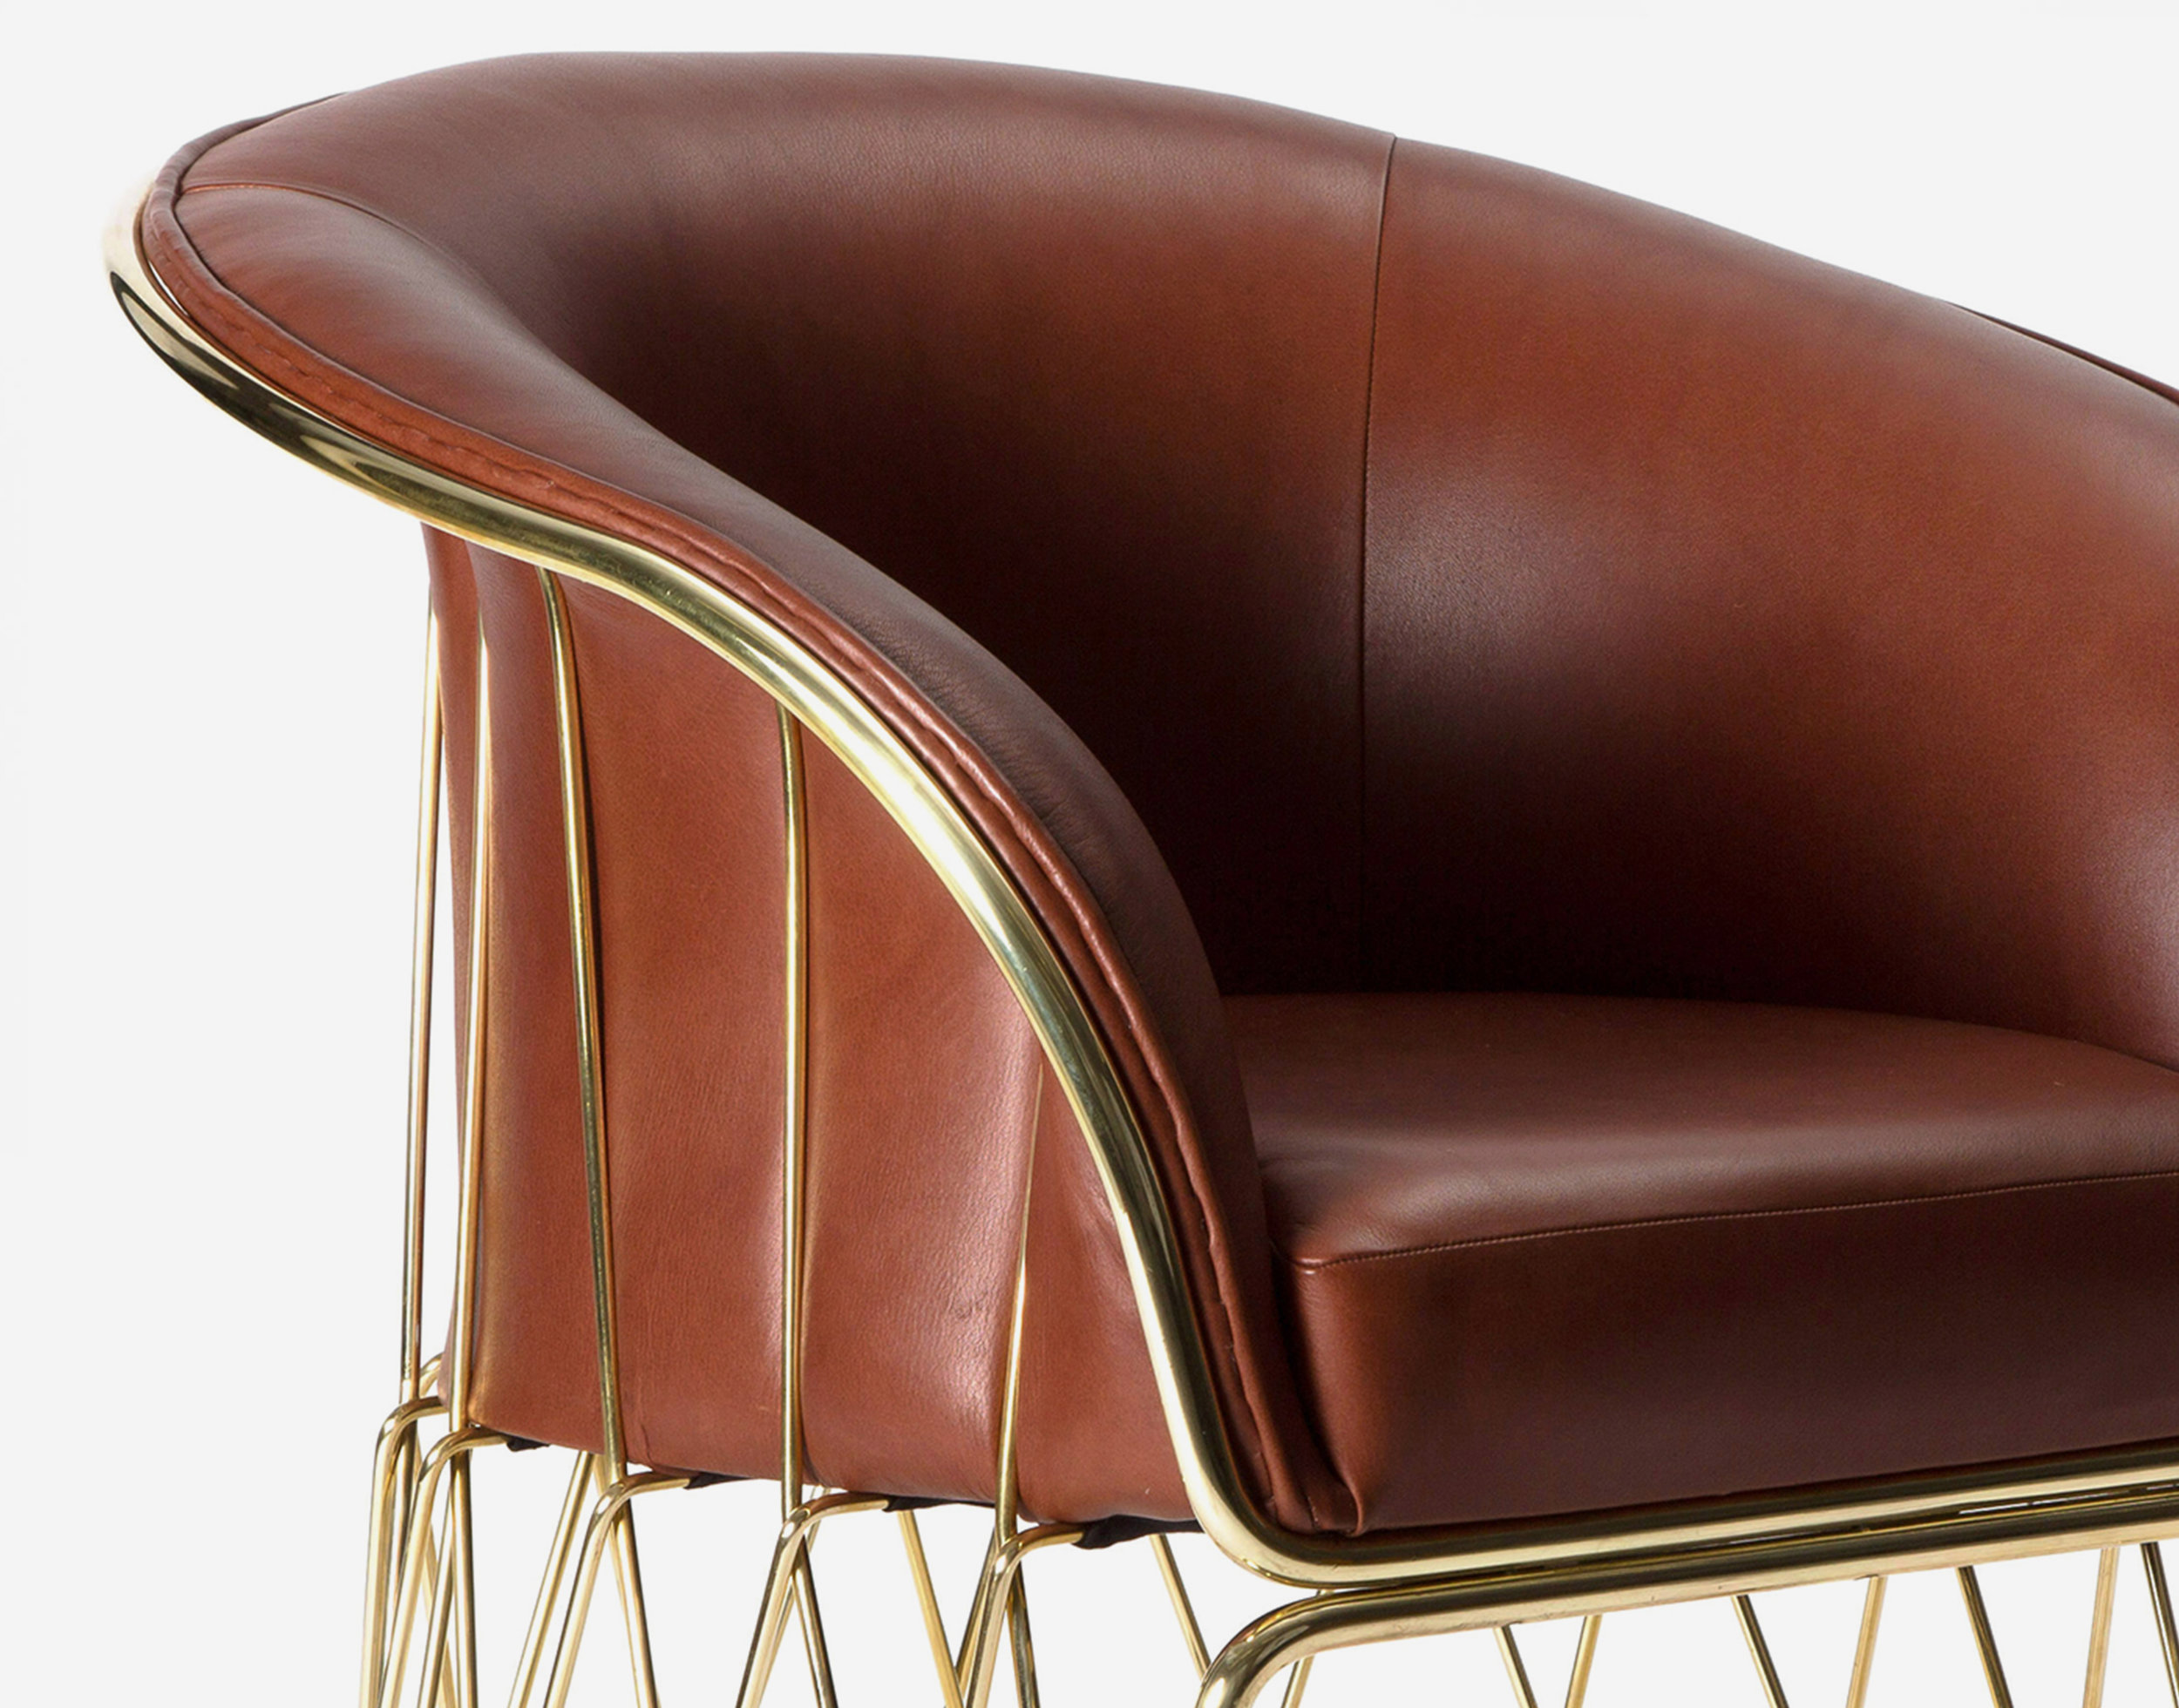 Luteca_PRV_Equipal-Chair_Brown-Leather-Polished-Brass_FP-Detail-W.jpg